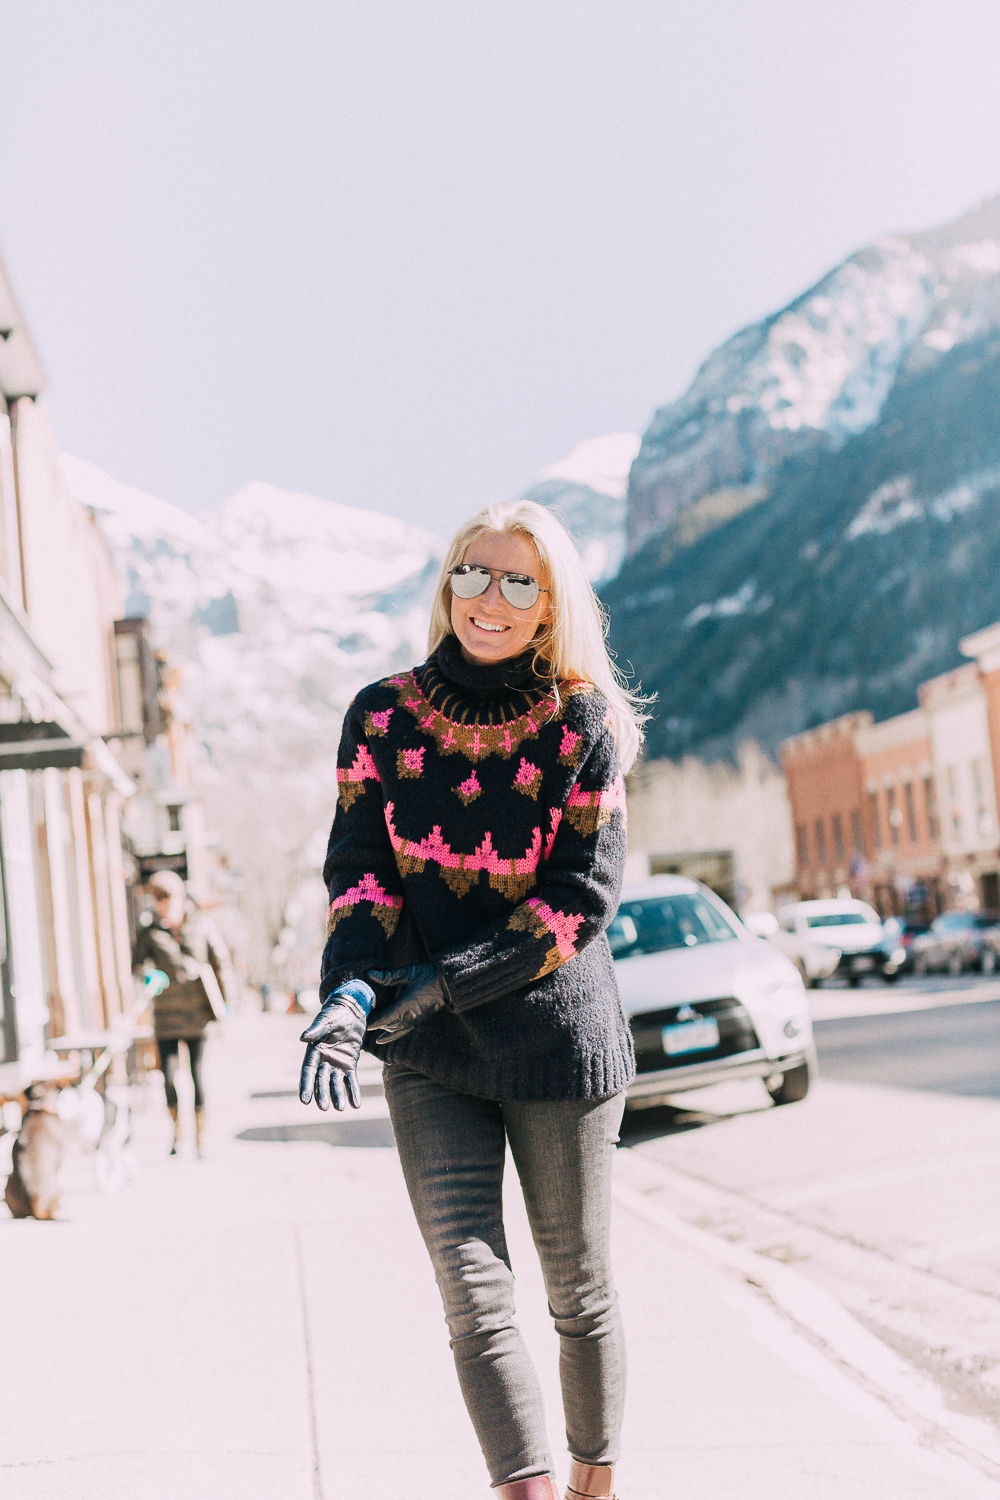 oversized chunky sweater by A.L.C. on fashion blogger in Telluride, Colorado